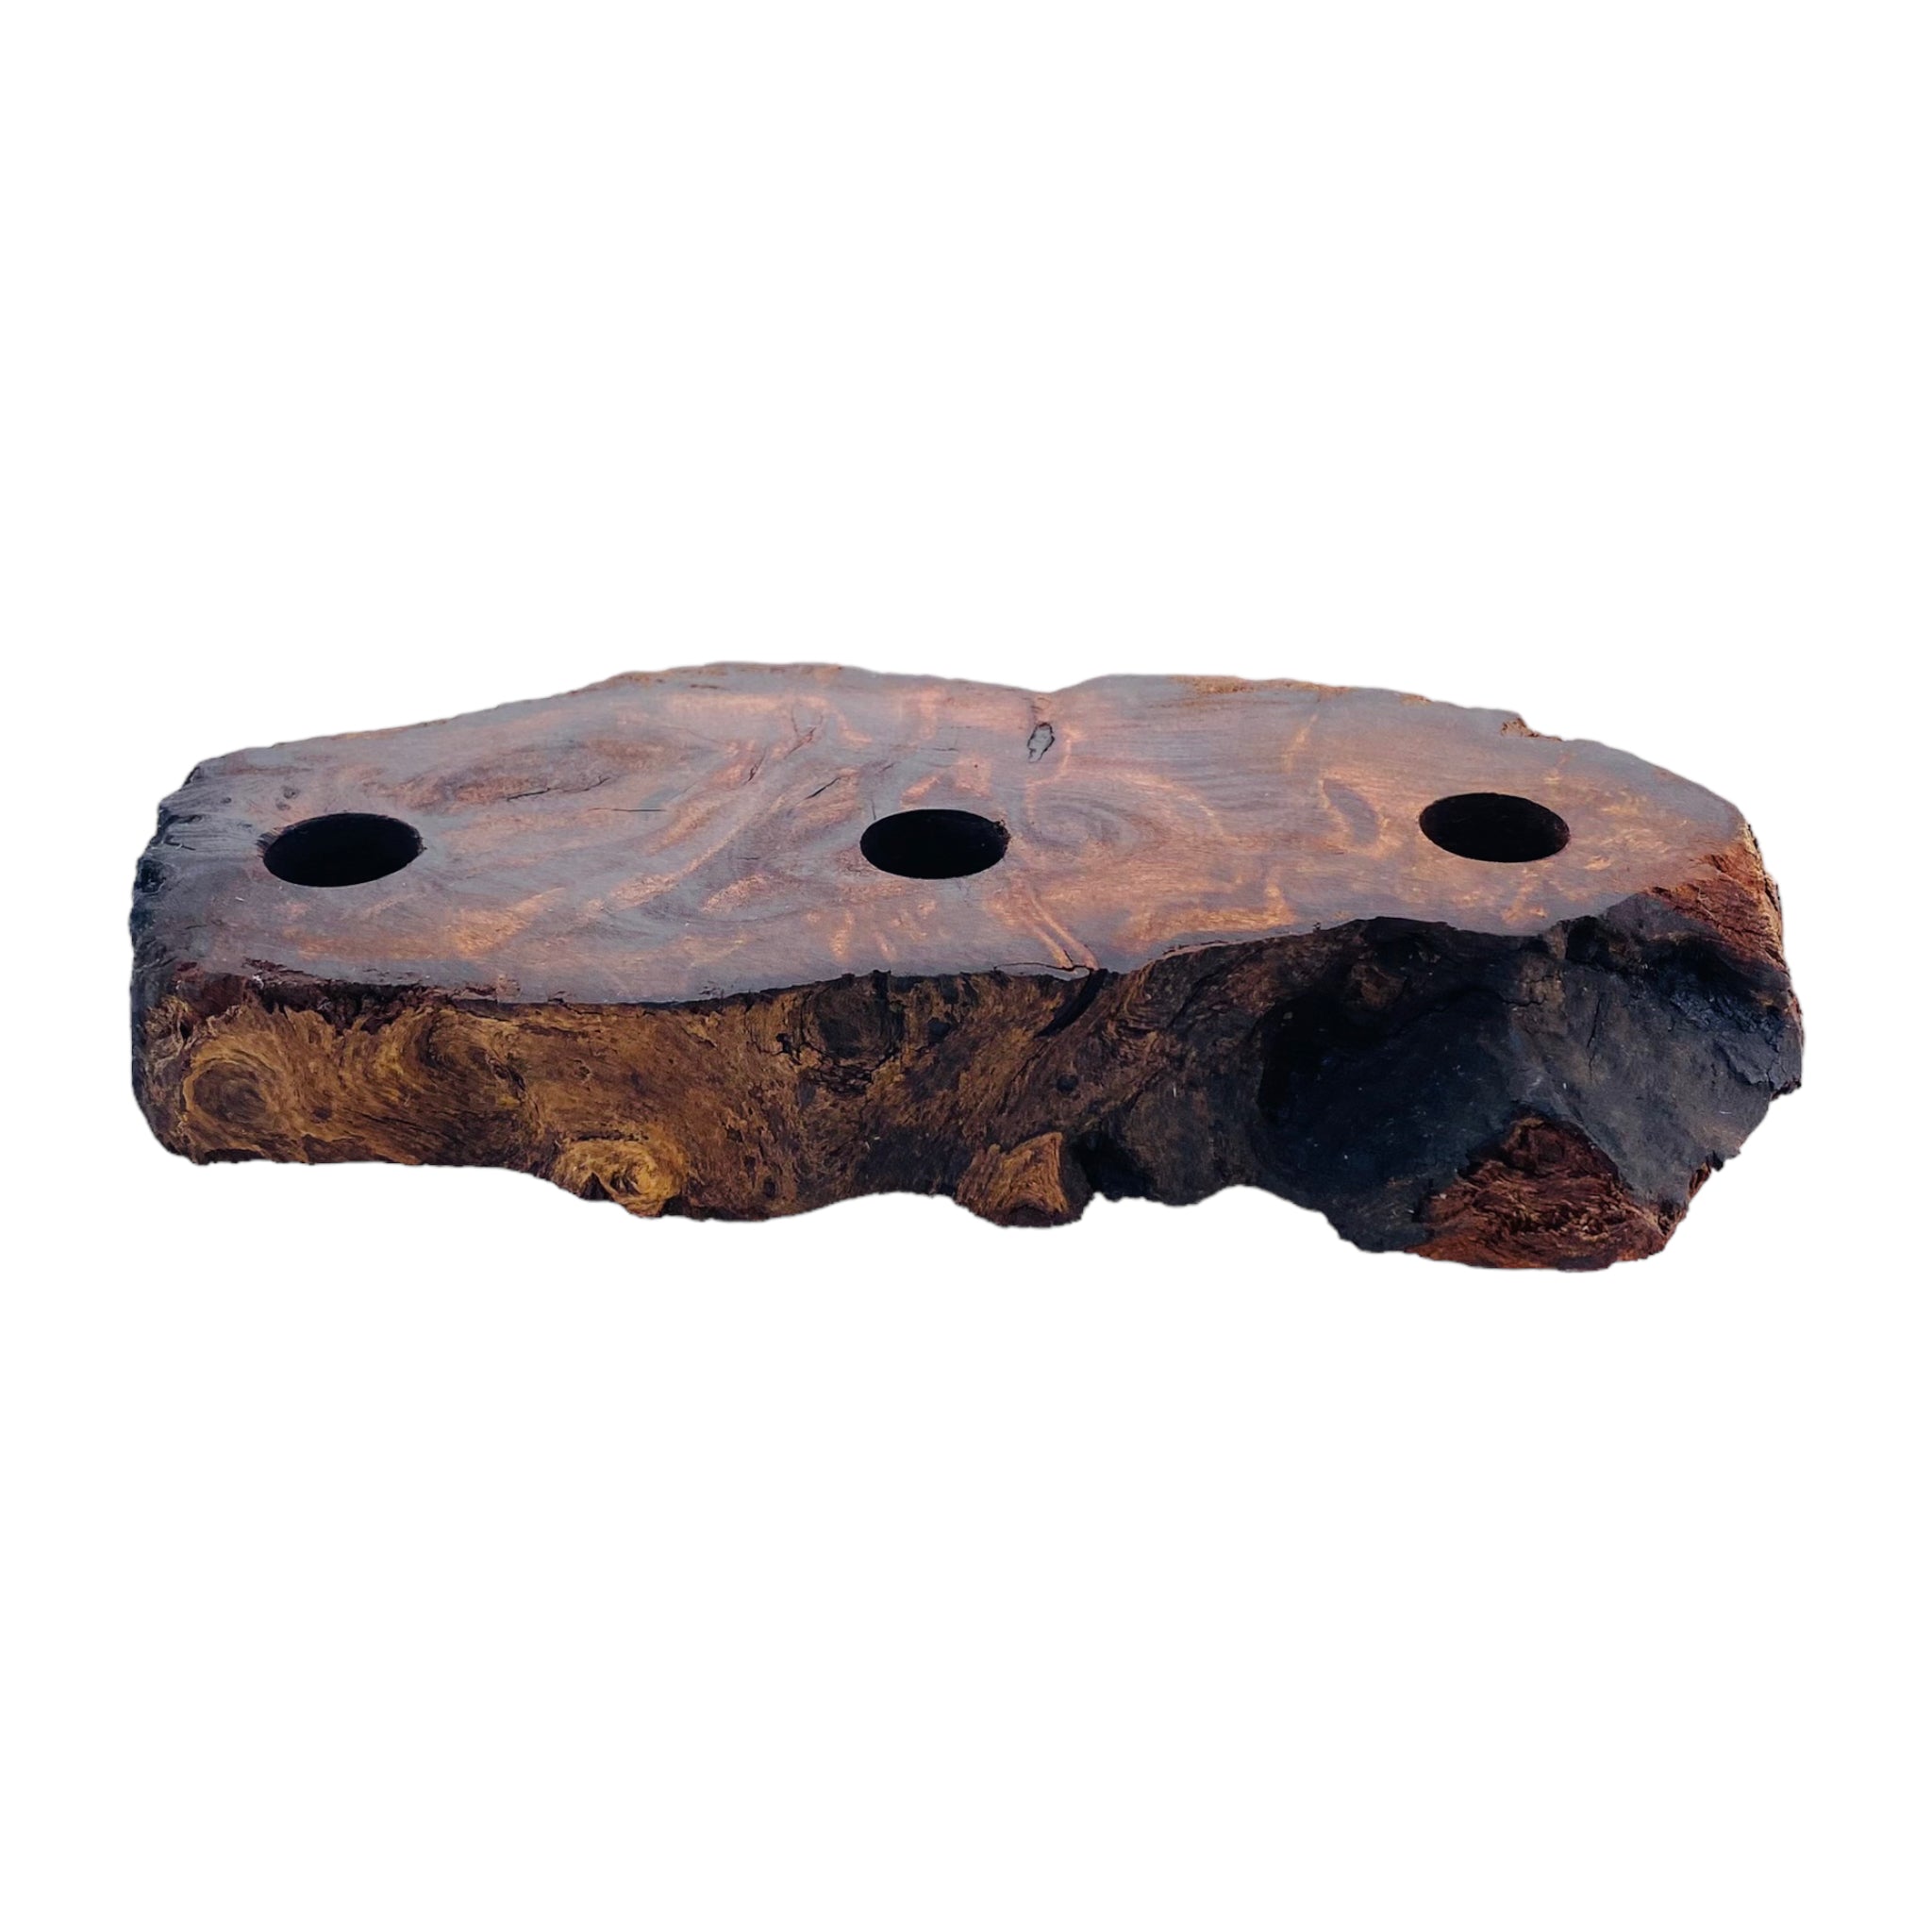 3 Hole Wood Display Stand Holder For 14mm Bong Bowl Pieces Or Quartz Bangers - Red Wood Burl With Live Edge #2